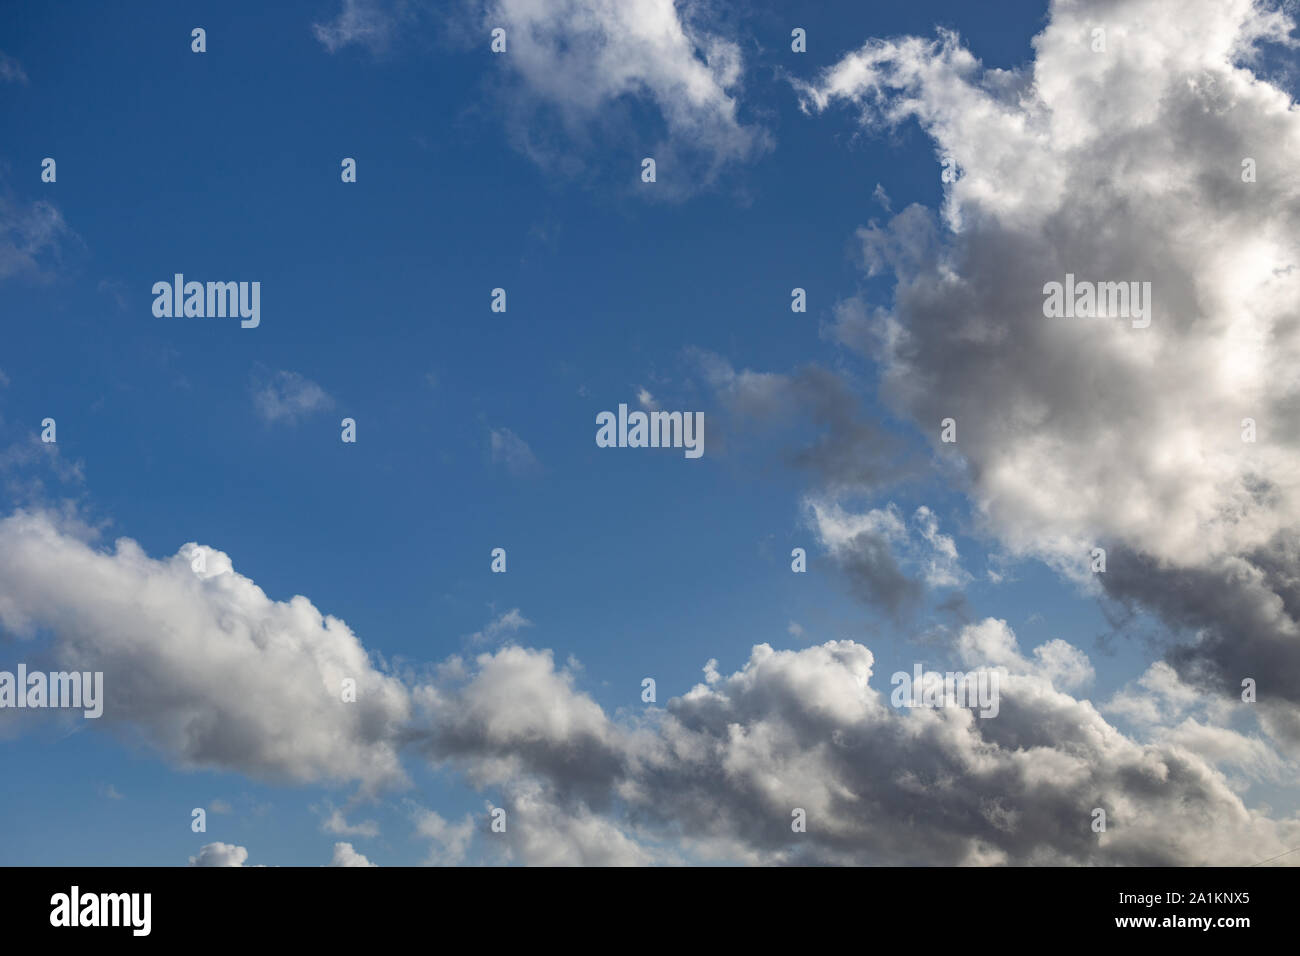 Blue sky with white and dark clouds background. Nature backdrop Stock Photo